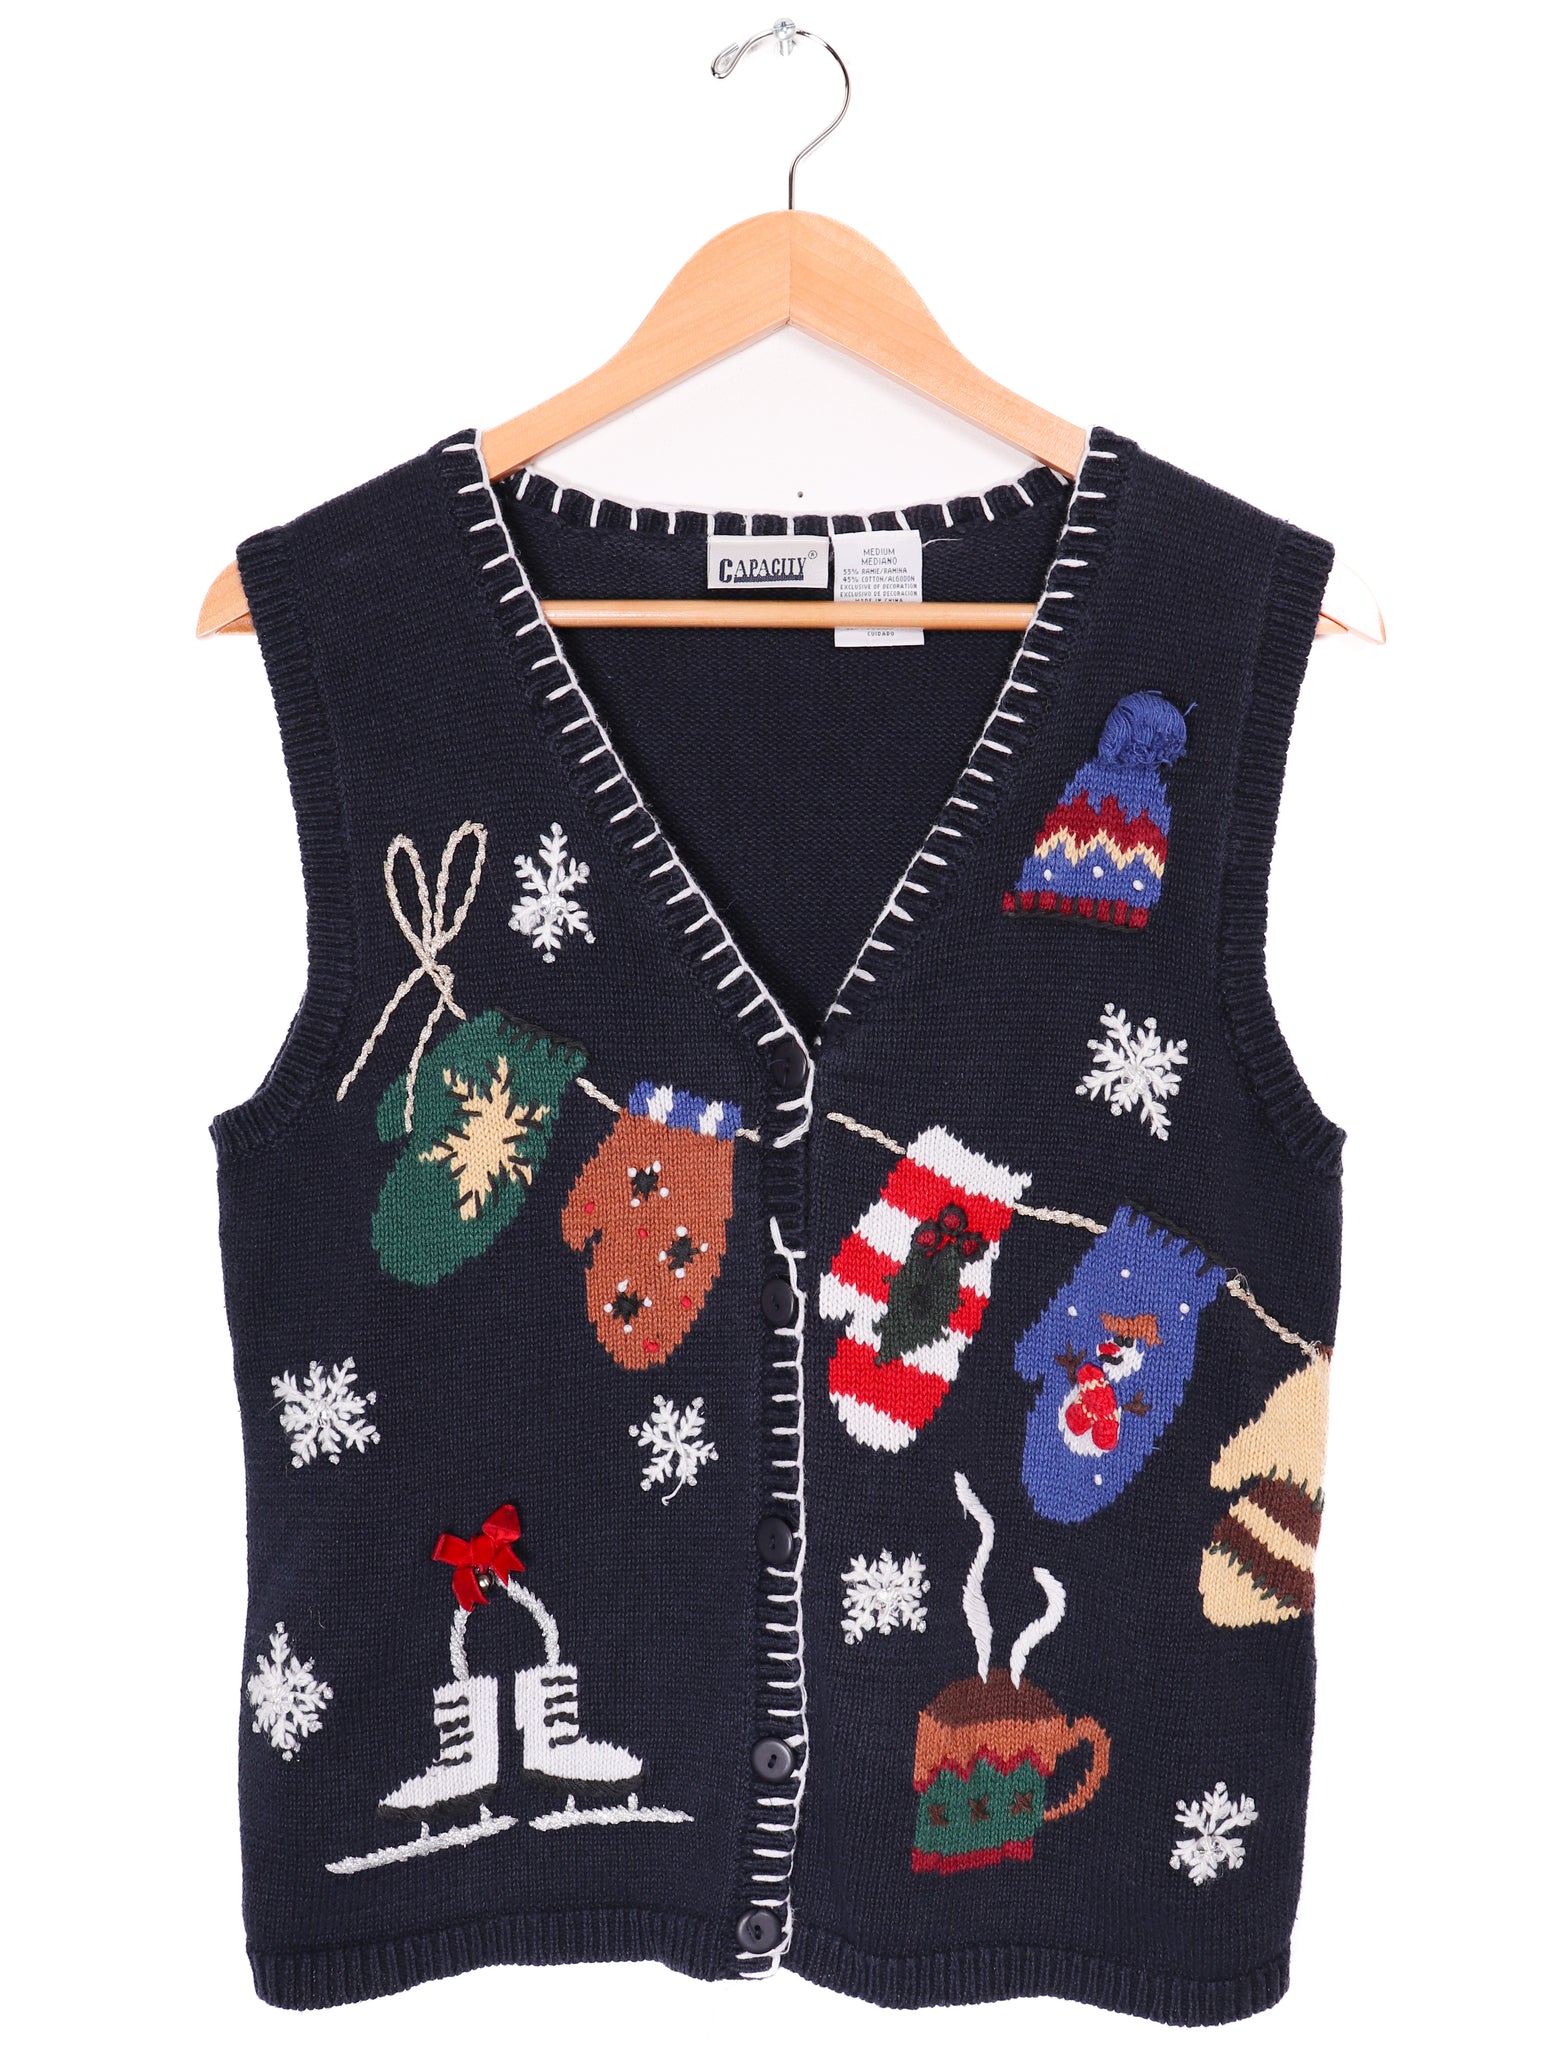 Capacity Embroidered Winter Sweater Vest